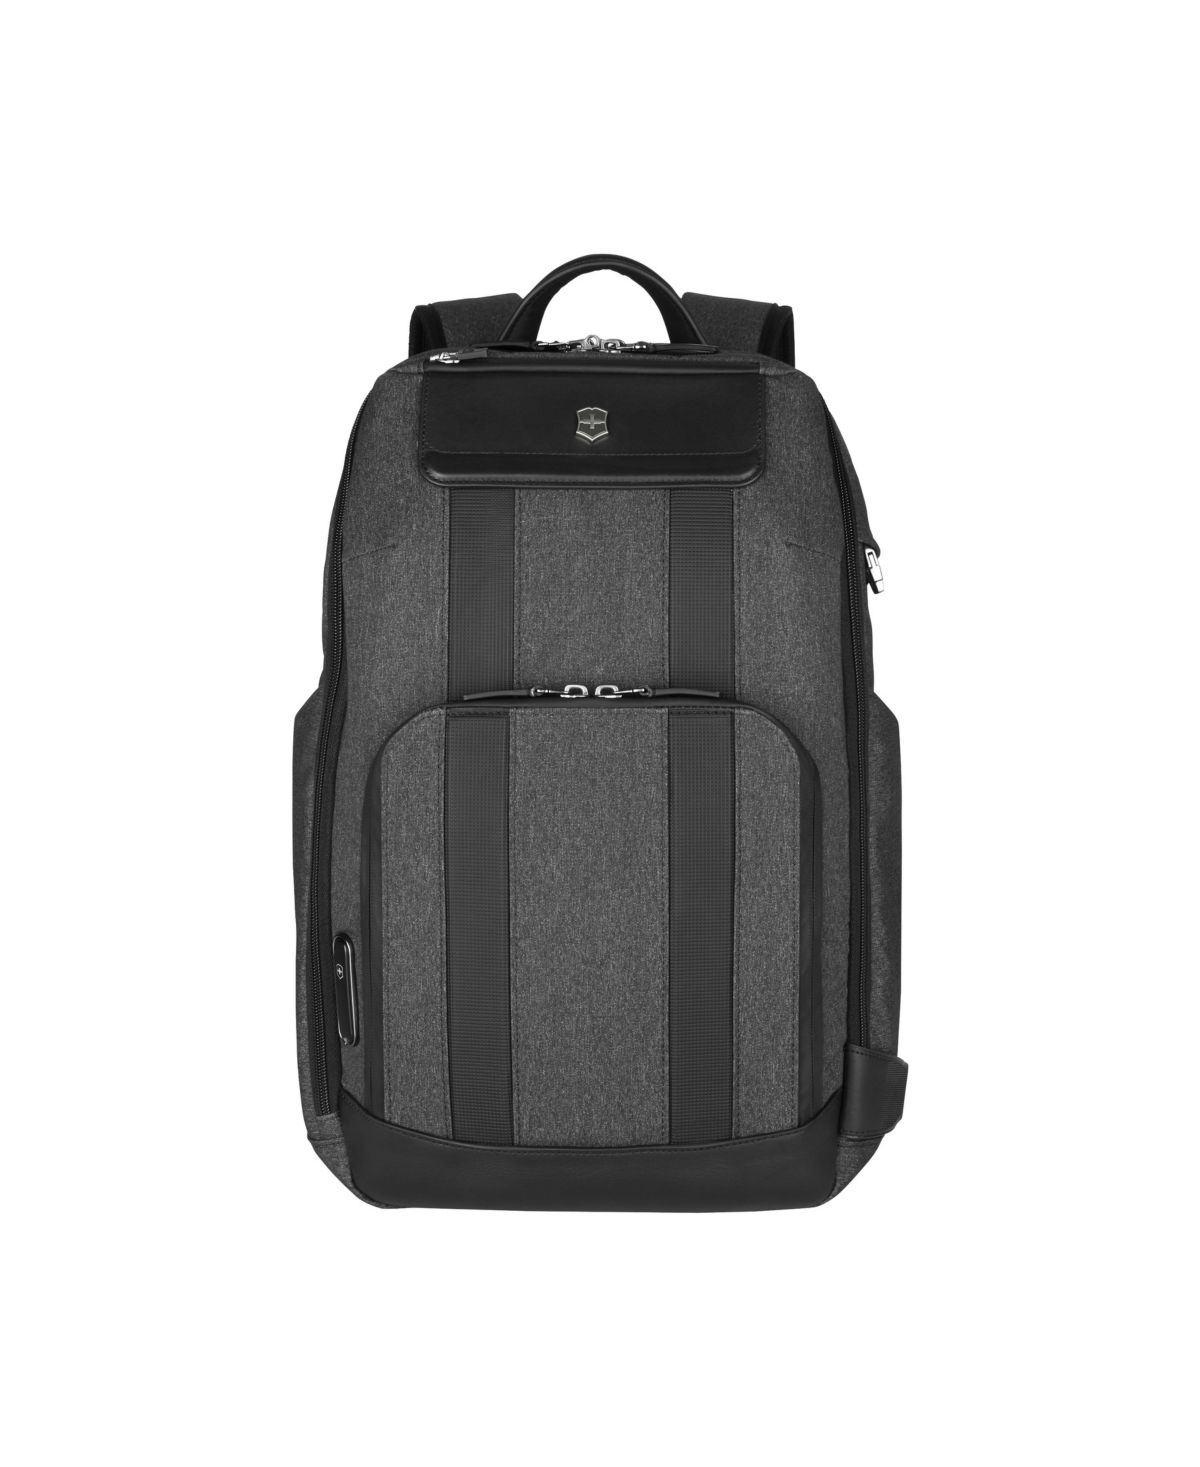 Architecture Urban 2 Deluxe Laptop Backpack - Gray